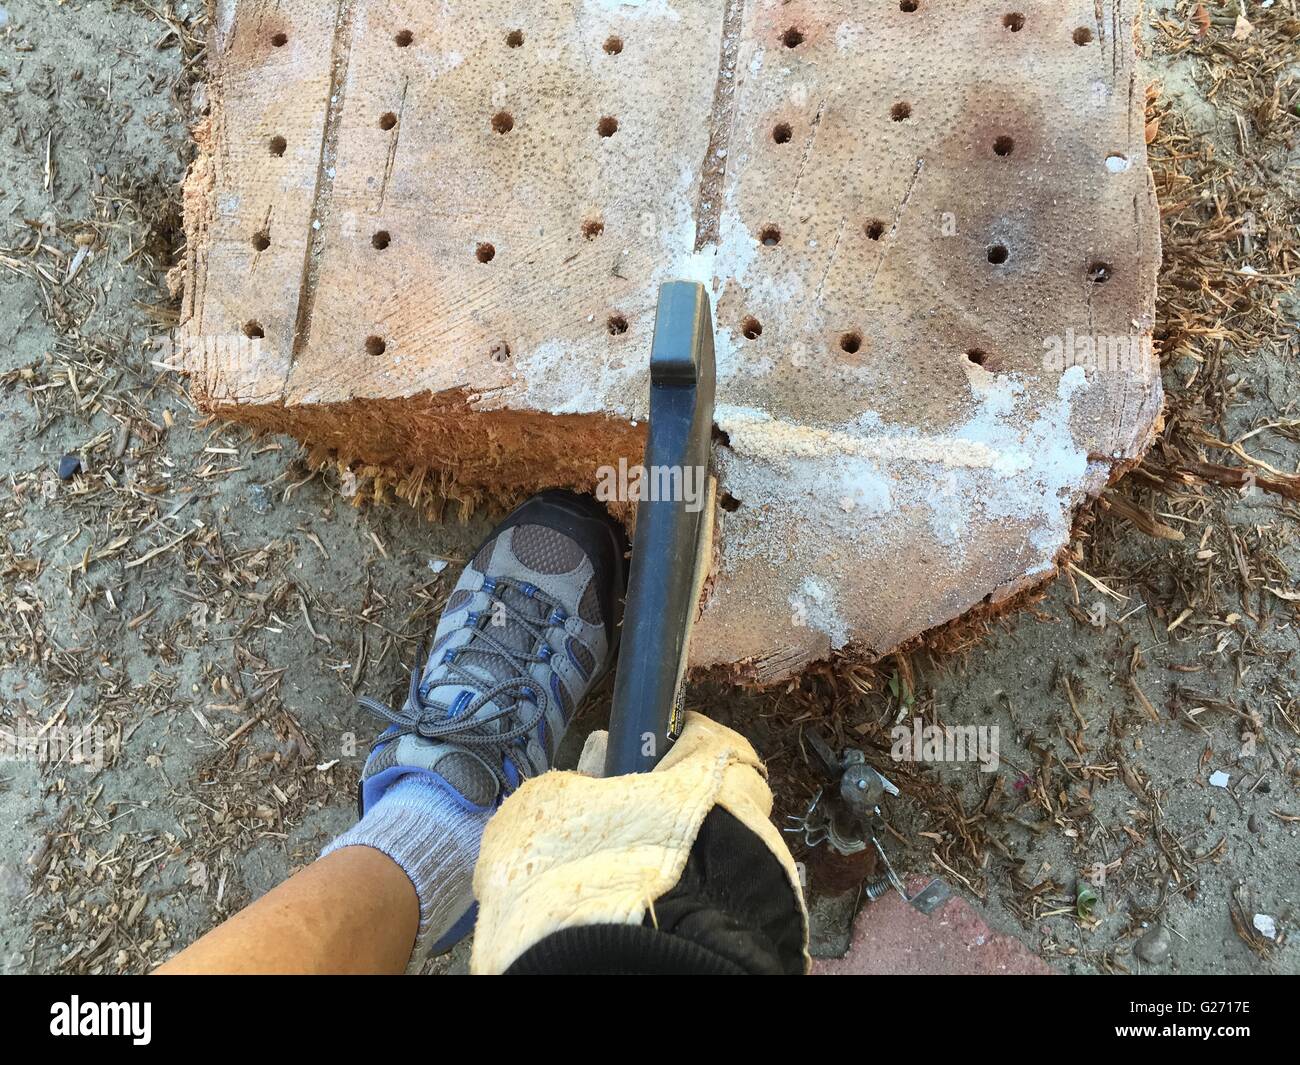 Female drills holes into a palm tree stump, fills holes with salt, then chops with a hand ax. Stock Photo